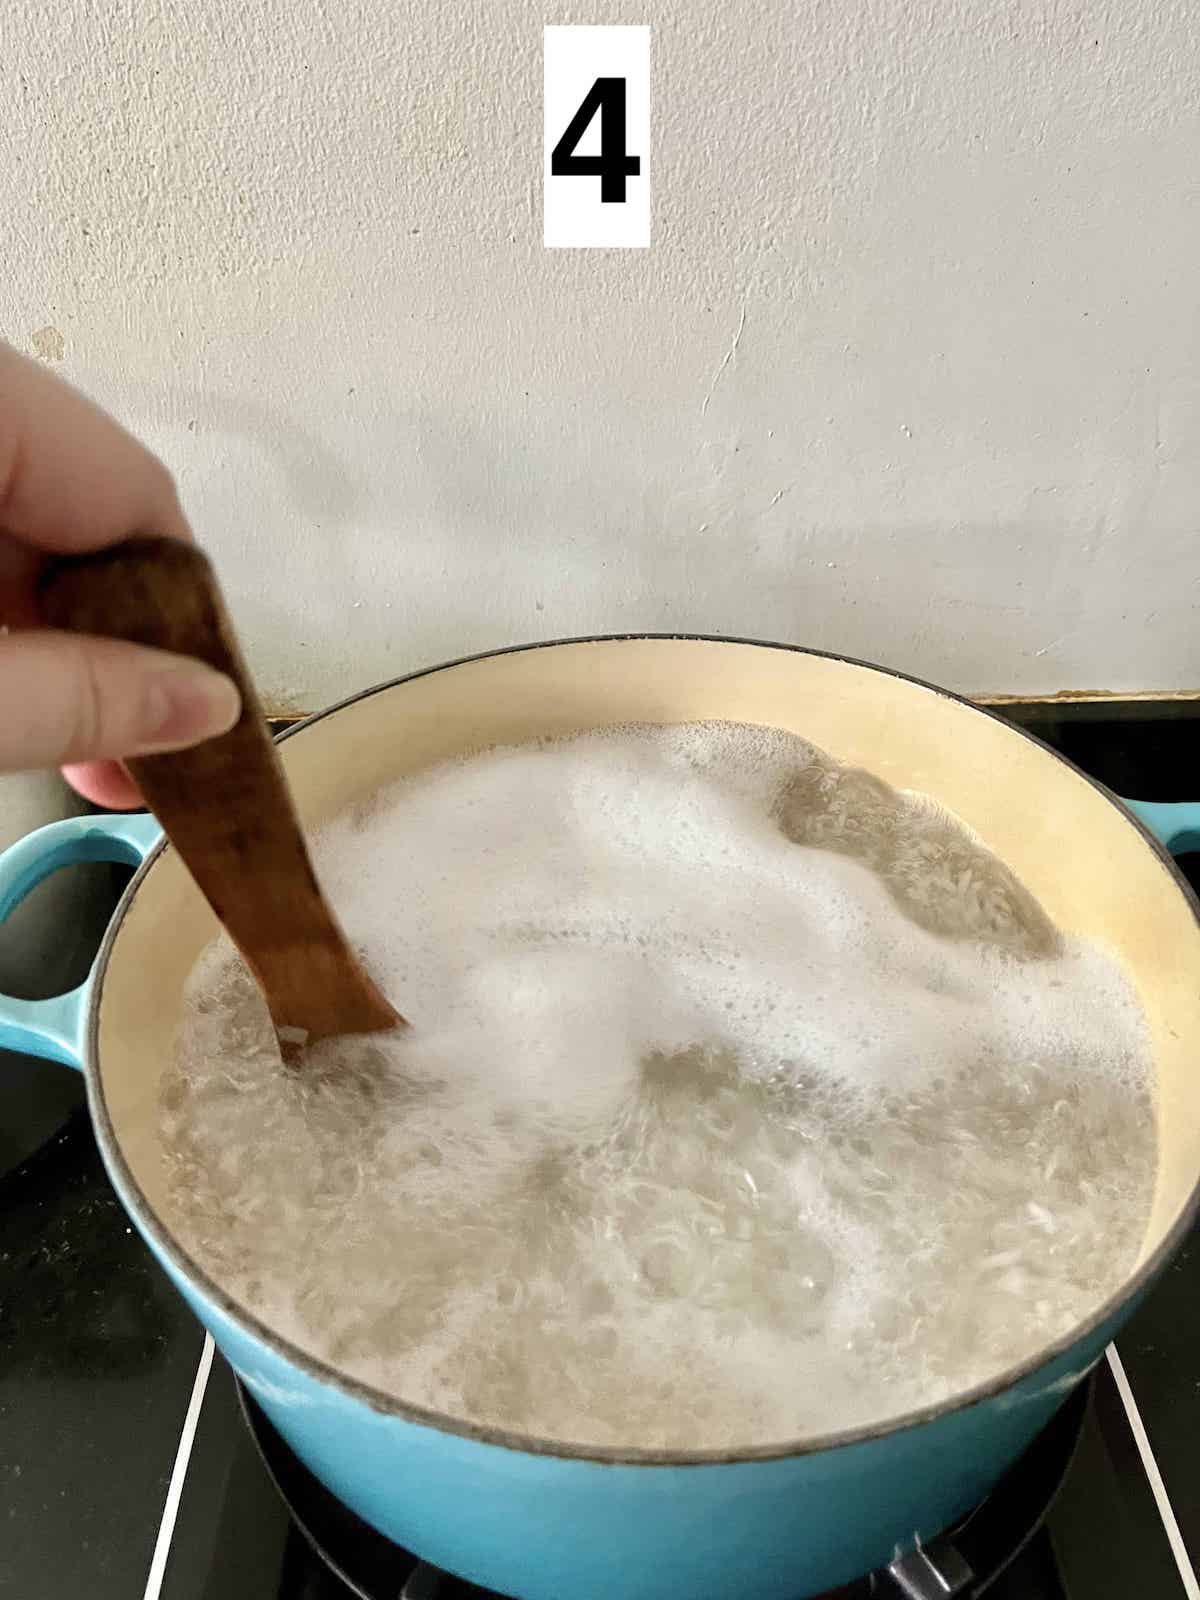 Stirring a boiling pot of rice and water.